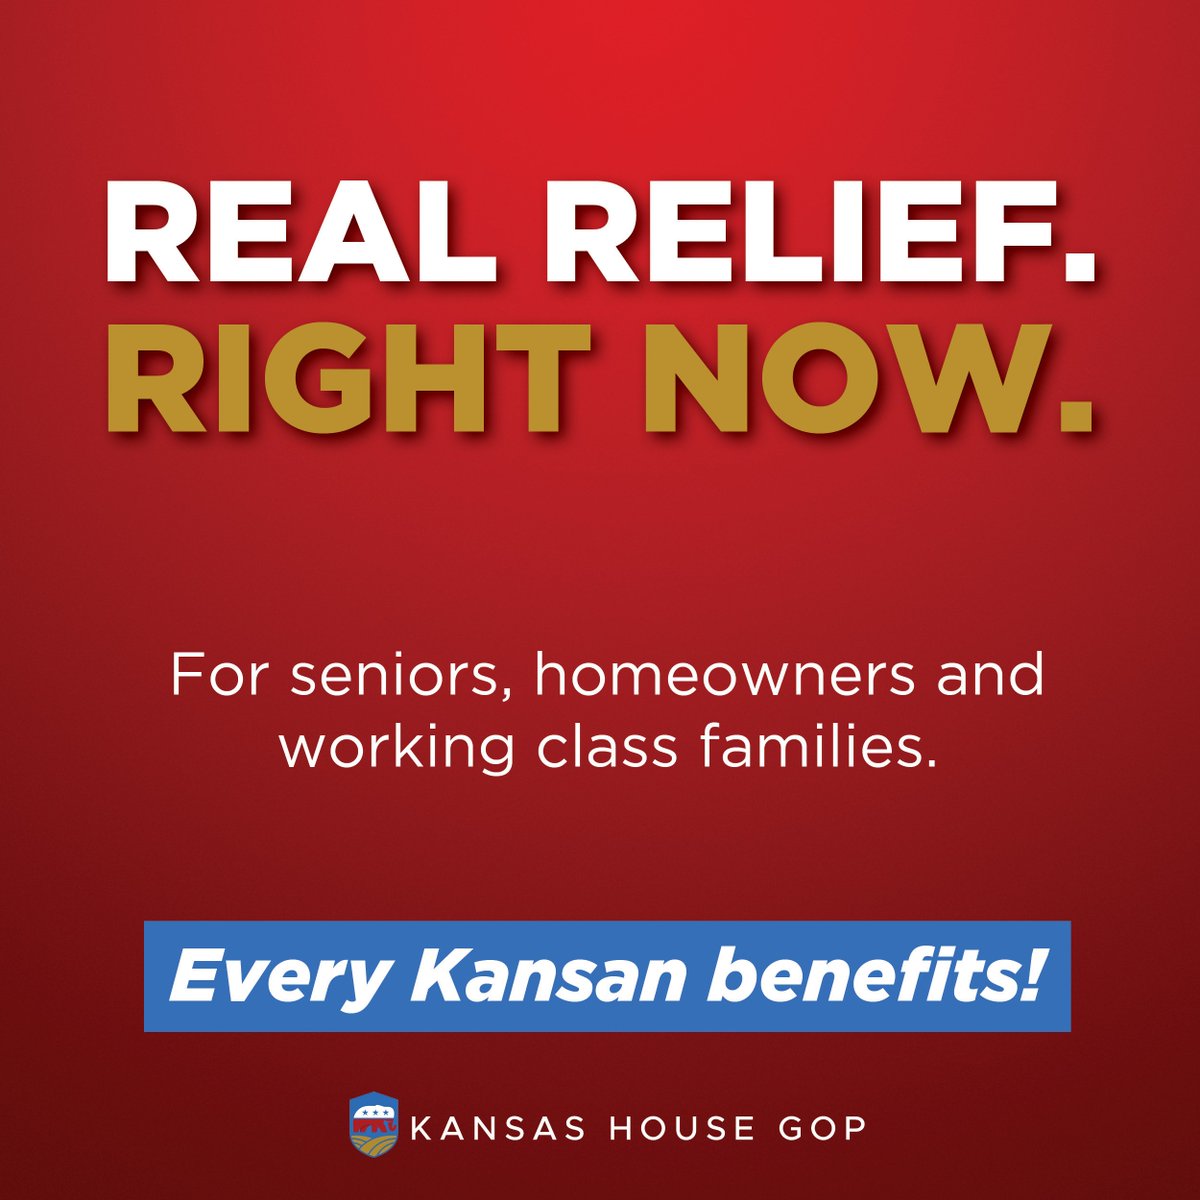 The only thing the legislative tax relief bill (unanimously supported in the House) needs now is a signature from the Governor. What is she waiting for? Let her know you're ready for real tax relief now!

#ksleg